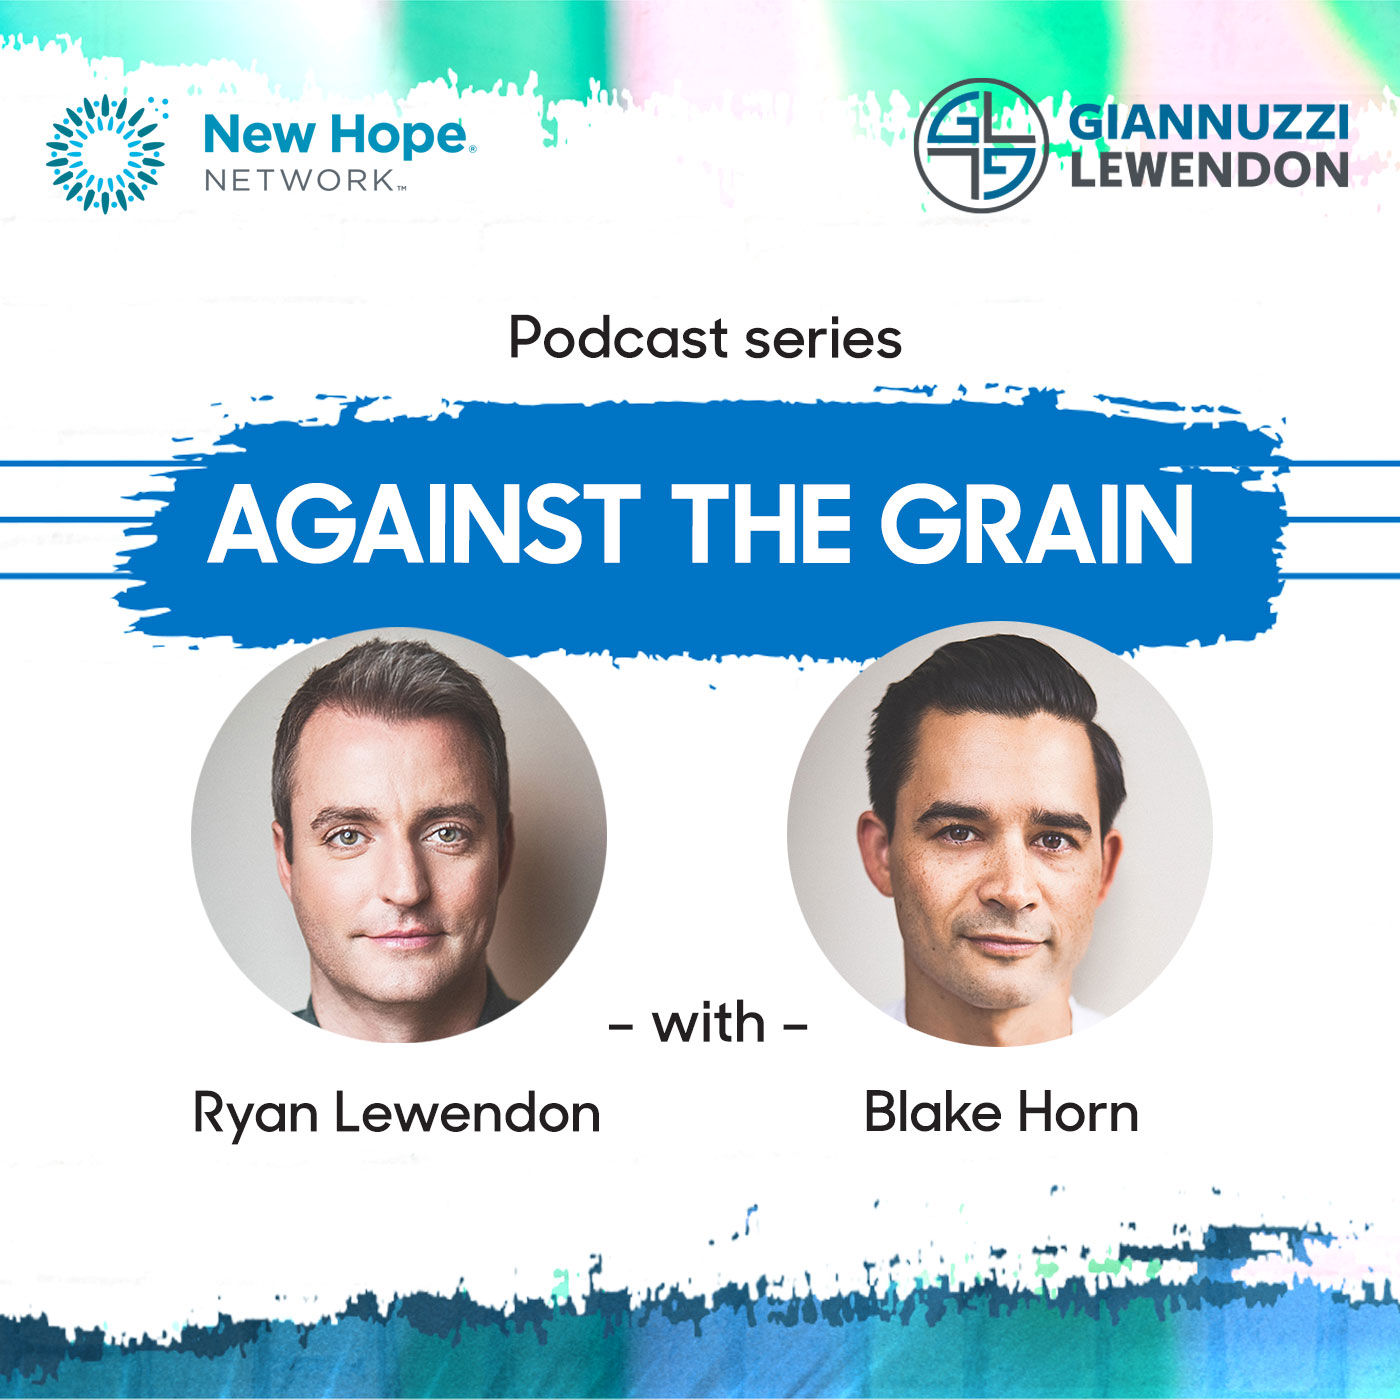 Artwork for podcast Against The Grain with Giannuzzi Lewendon